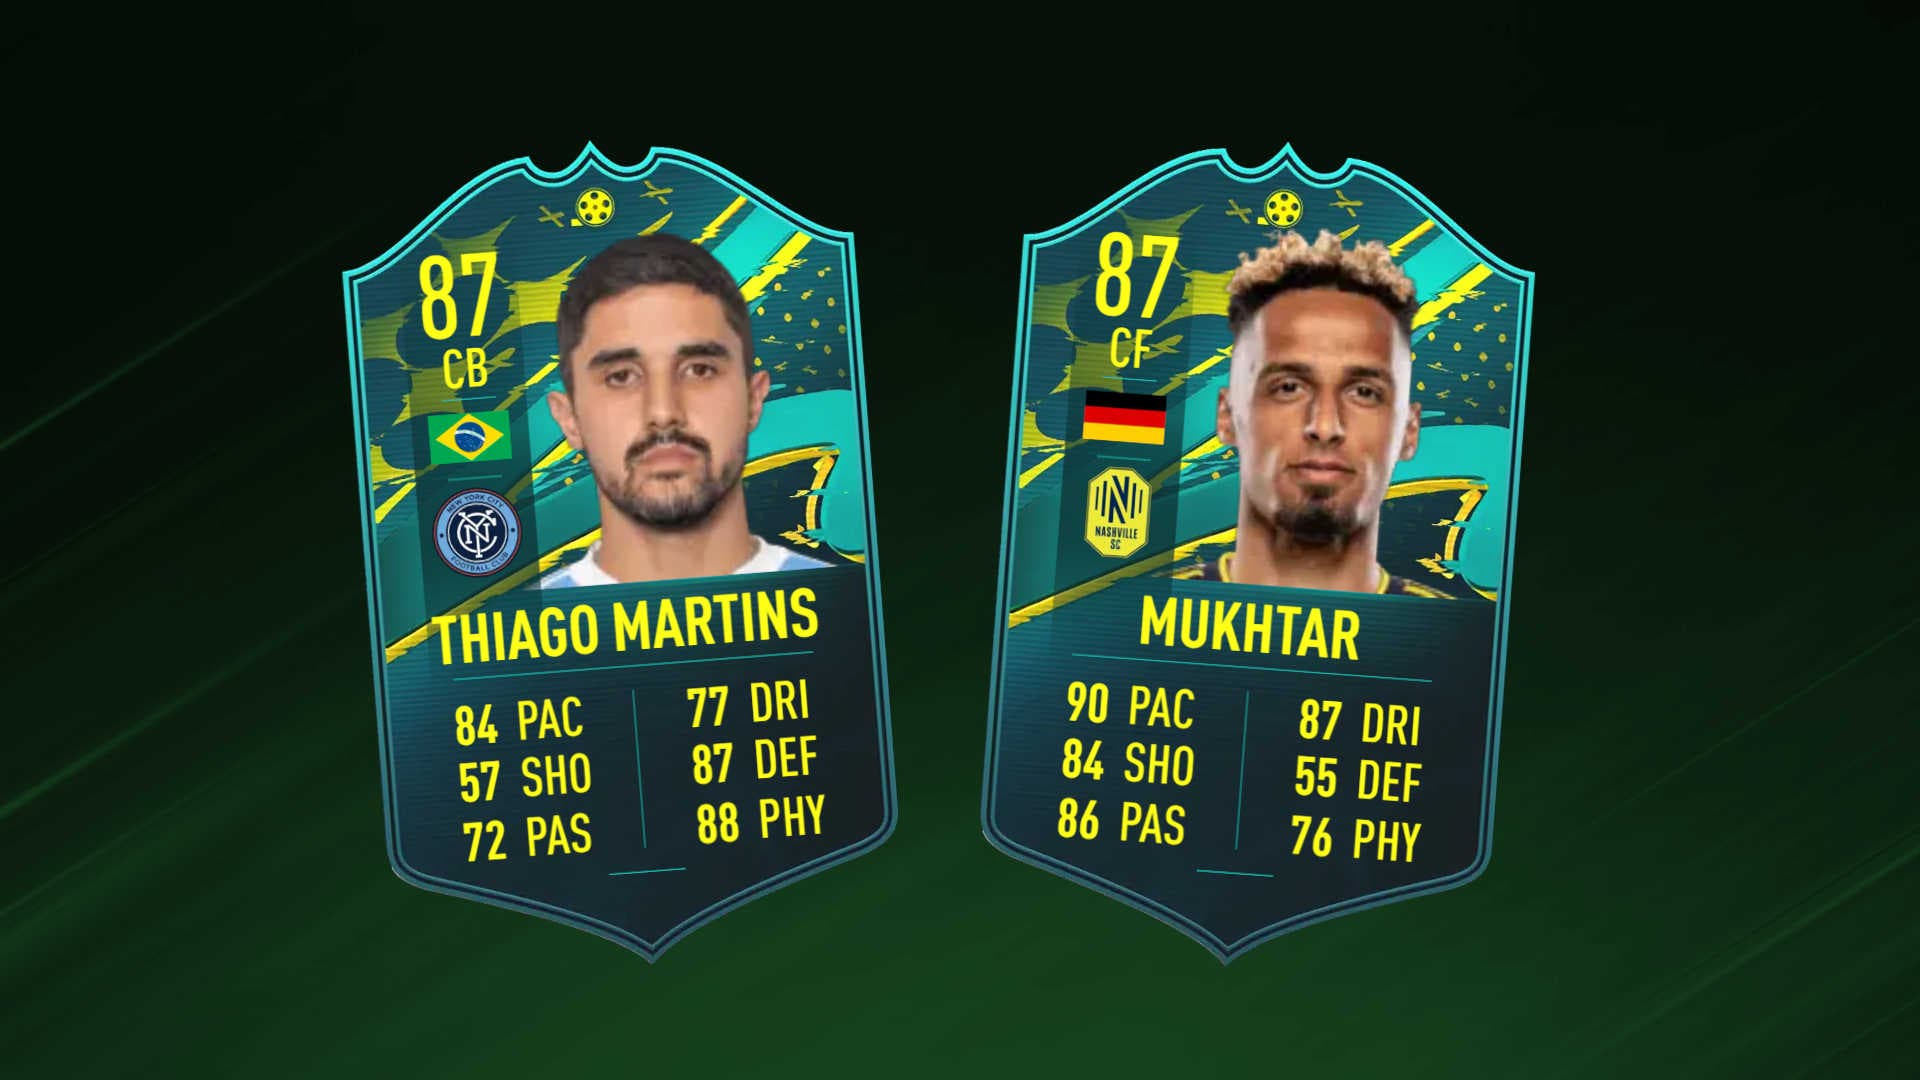 FIFA 23: two free cards are coming, but you can only get one